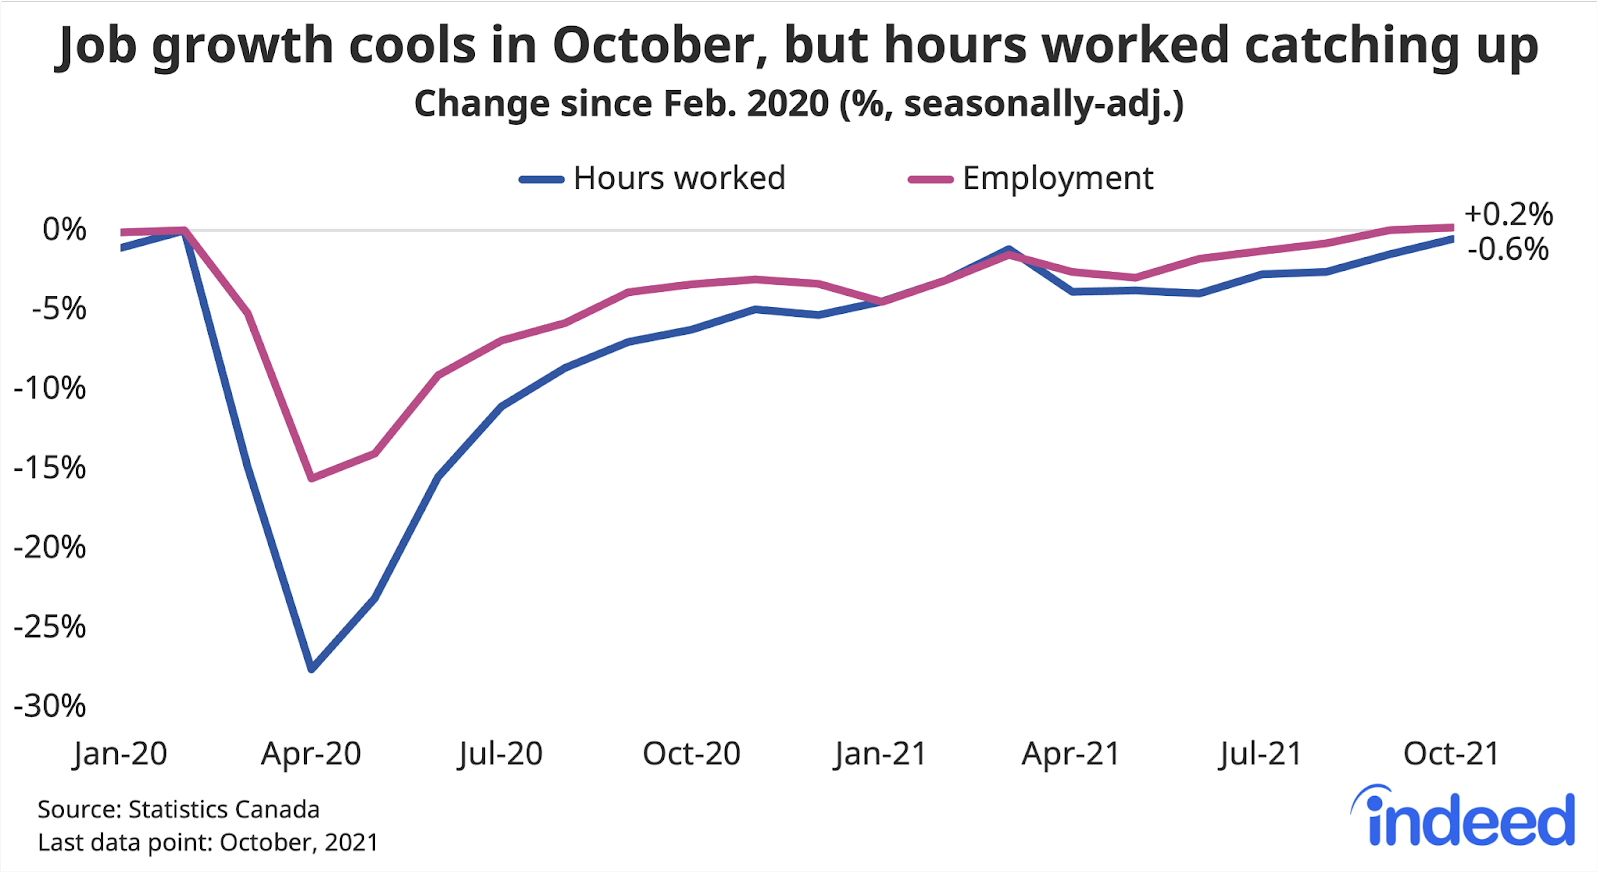 Line graph titled “Job growth cools in October, but hours worked catching up.” With a vertical axis ranging from -30% to 0%, Indeed tracked the percent change in employment since February 2020 along a vertical axis ranging from January 2020 to October 2021. The two line colours represent “hours worked” and “employment.” In October 2021, hours worked was at -0.6% and employment was at +0.2%.